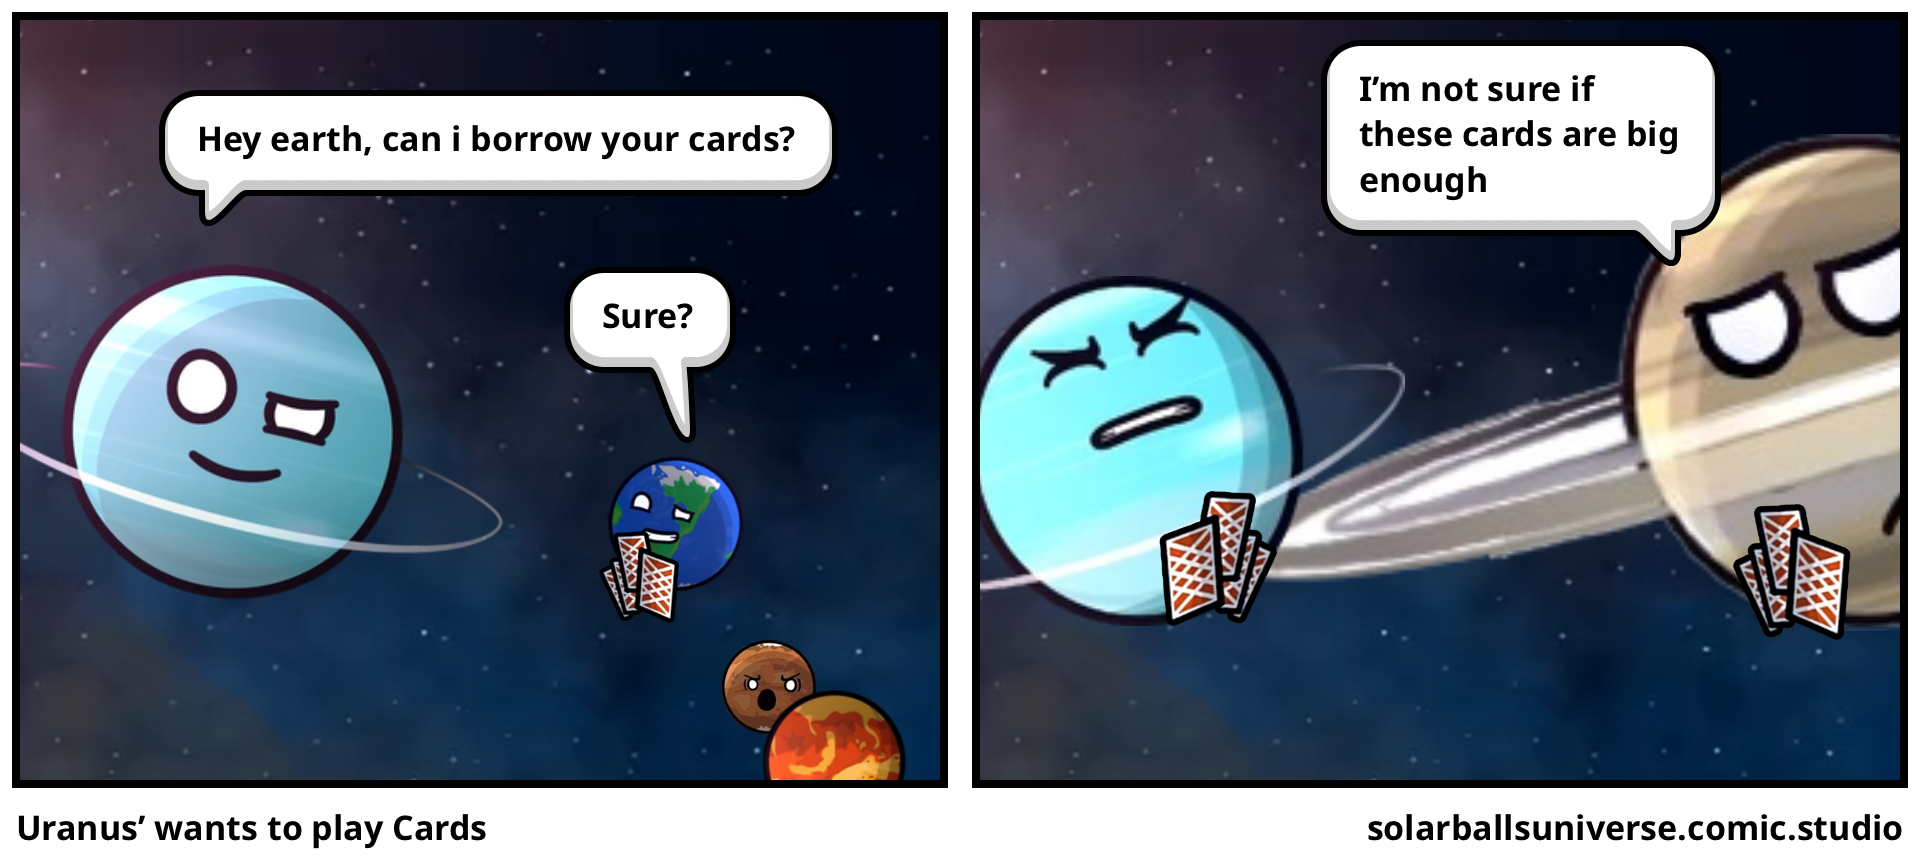 Uranus’ wants to play Cards